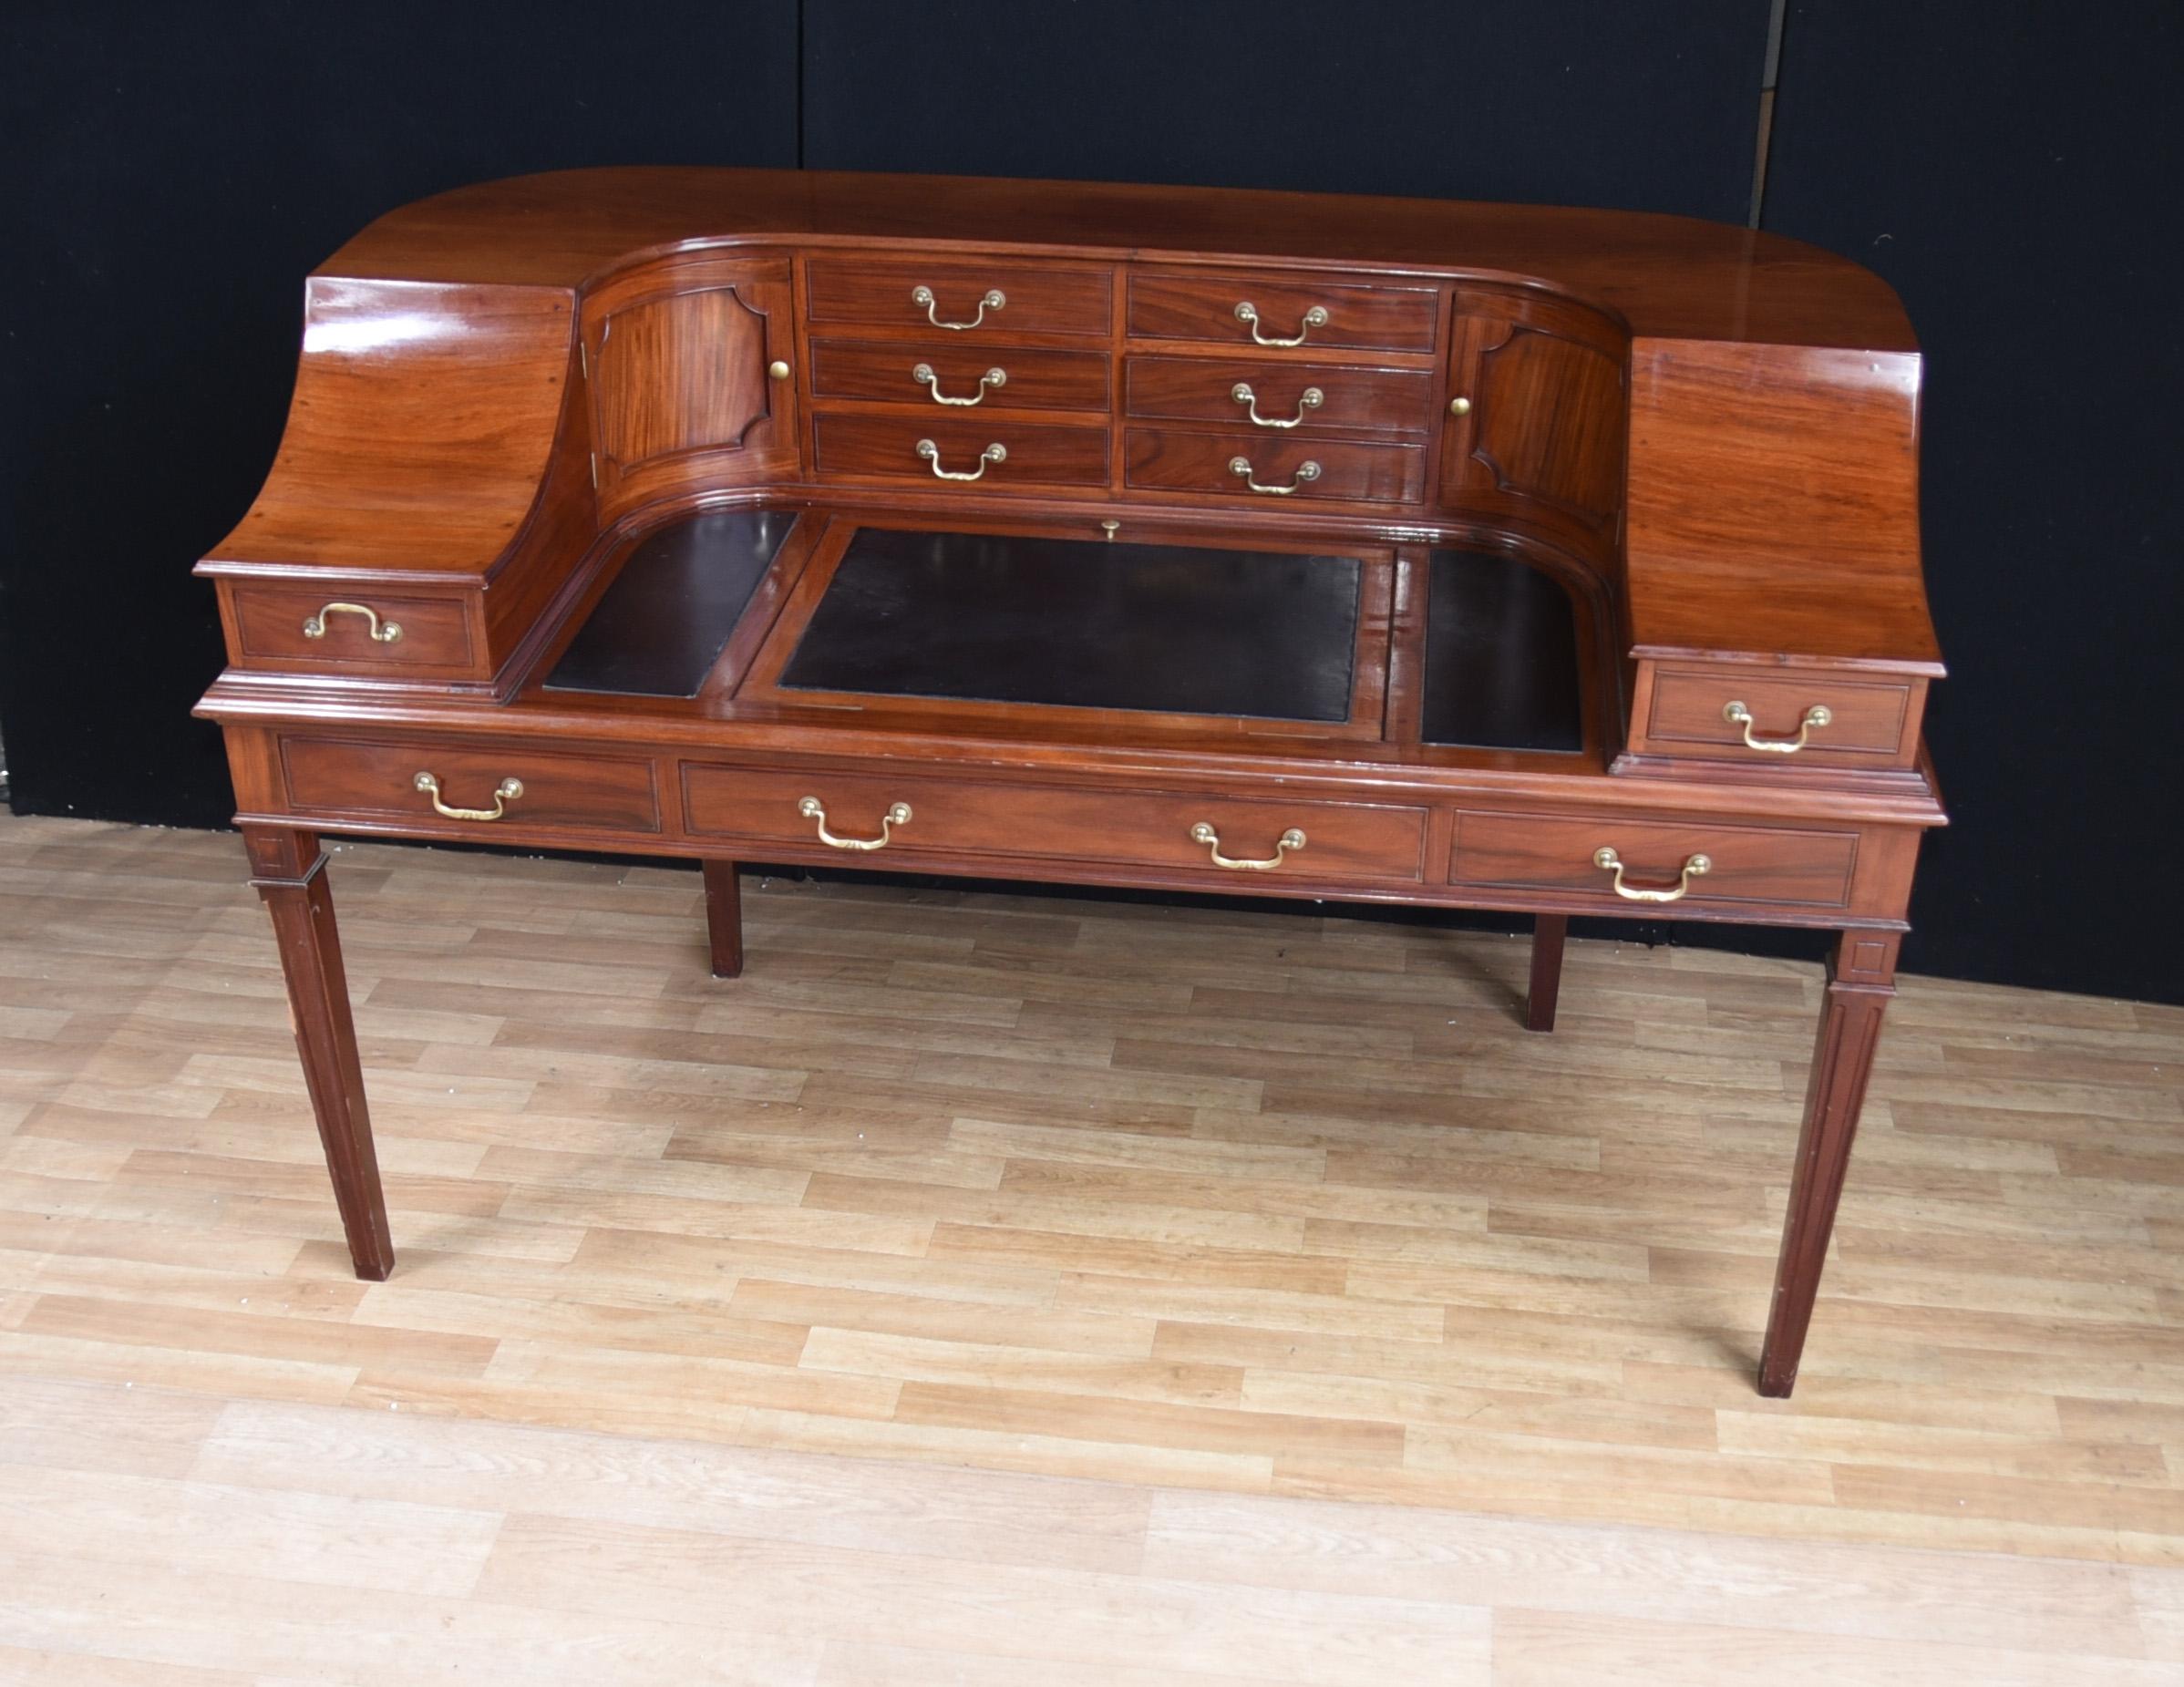 - Gorgeous Regency style Carlton House desk in mahogany
- Very elegant piece, love the curves to the design
- We date this antique to circa 1920
- Also very attractive grain and patina to the walnut
- Very comfortable to sit and work at, great